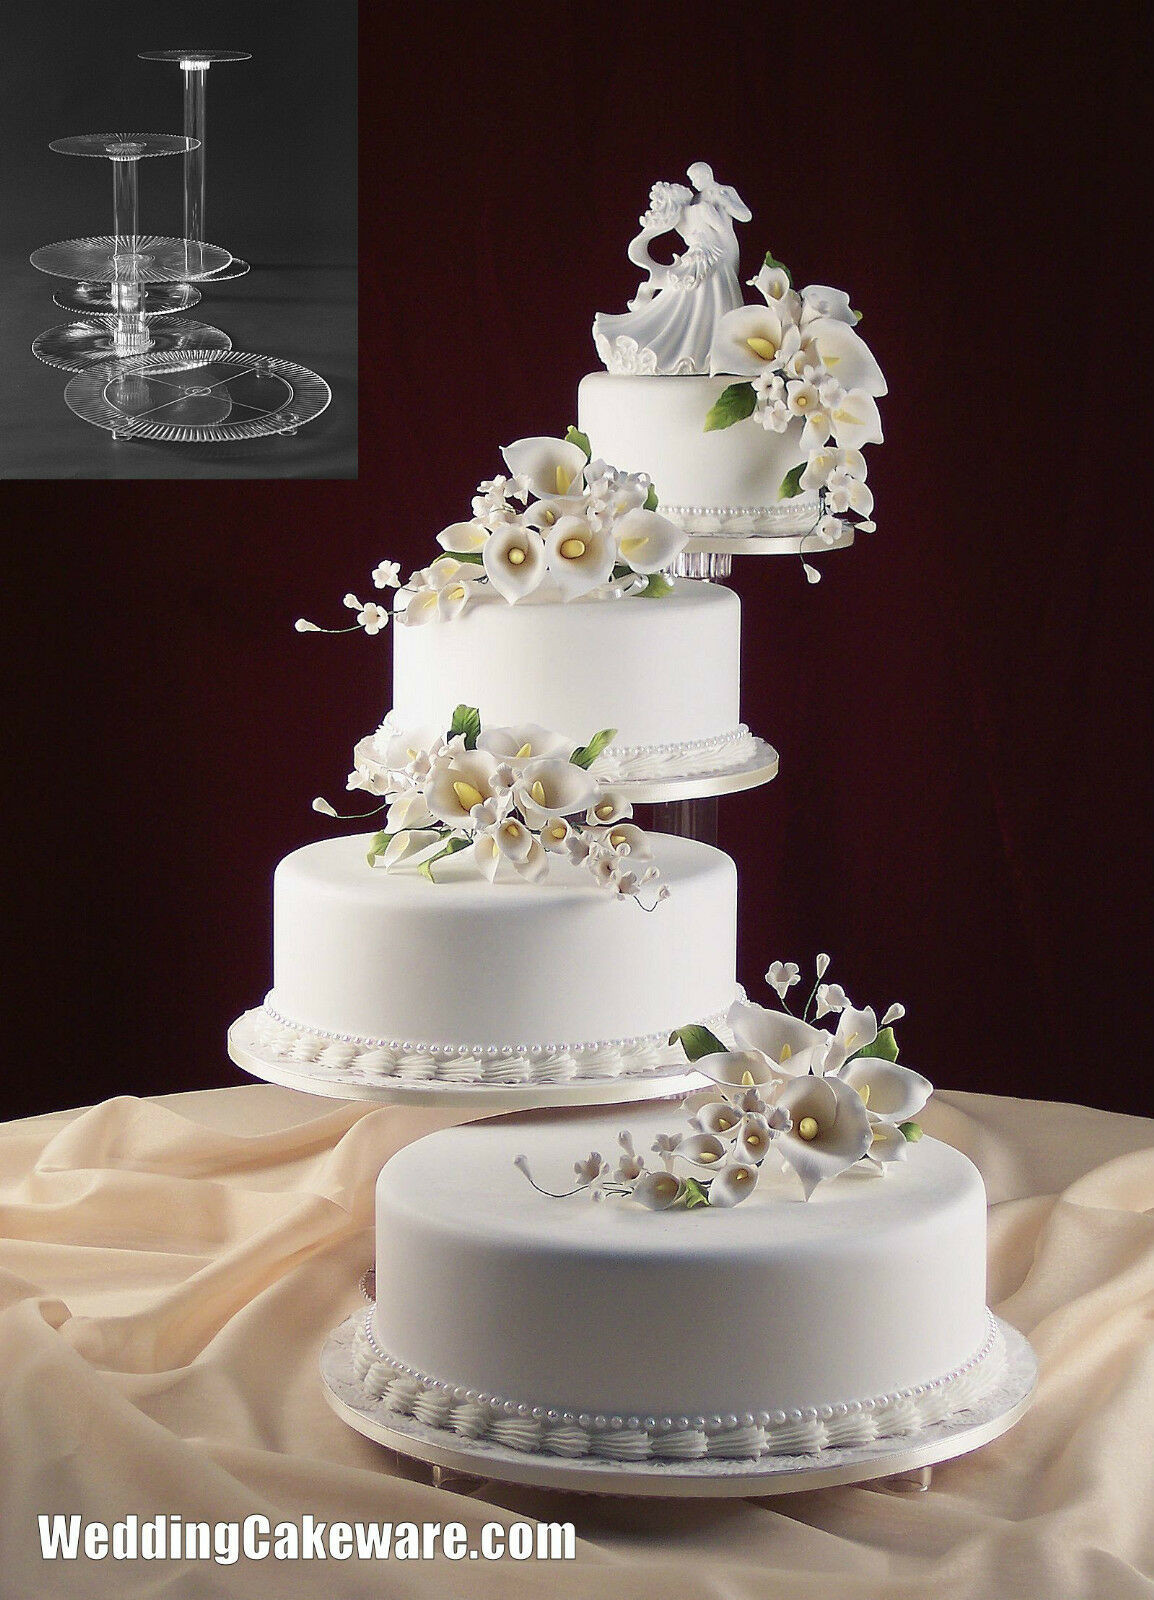 Tier Wedding Cakes
 Wedding Cakes Stands Bling Wedding Cake Stand Drum 18